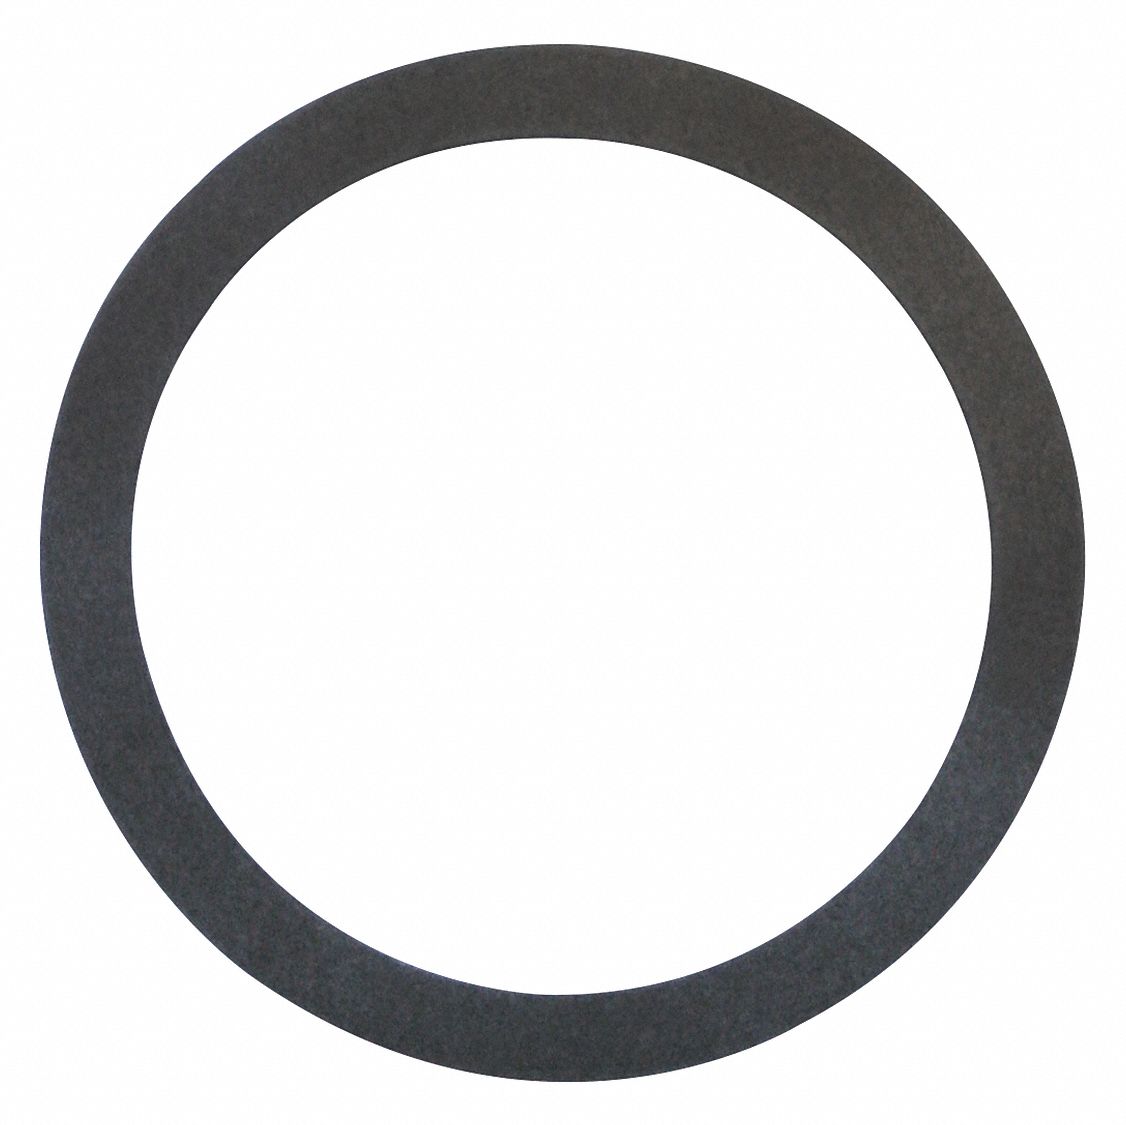 Gasket: 2 1/2 in Tube Size, 2.3438 in Inside Dia., 2.9531 in Outside Dia., 3/32 in Thick